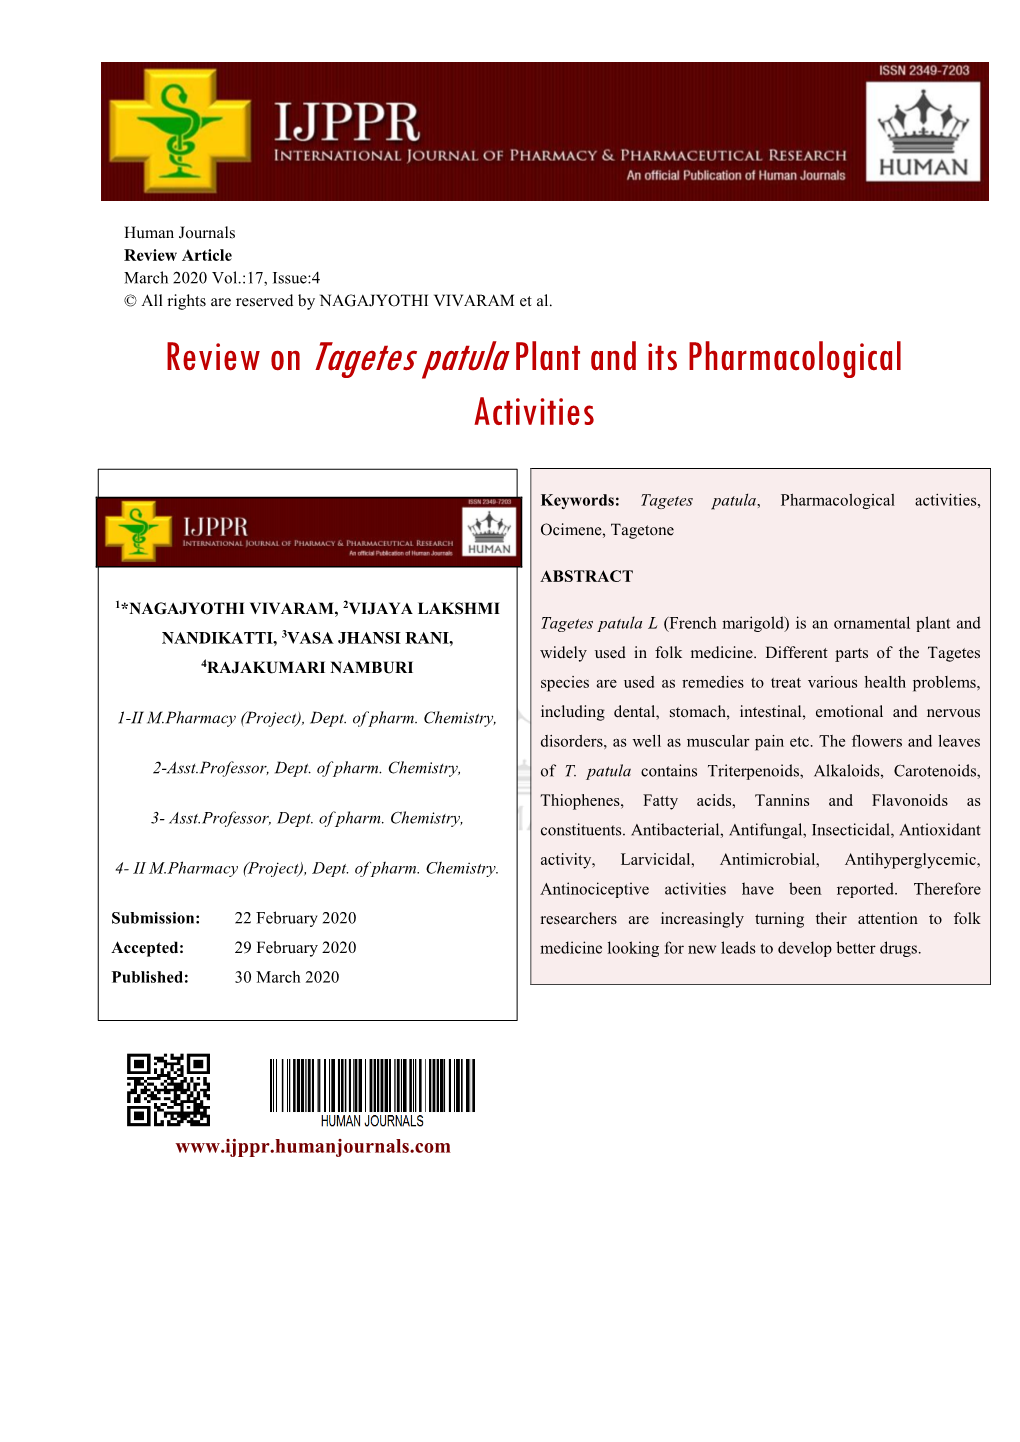 Review on Tagetes Patulaplant and Its Pharmacological Activities